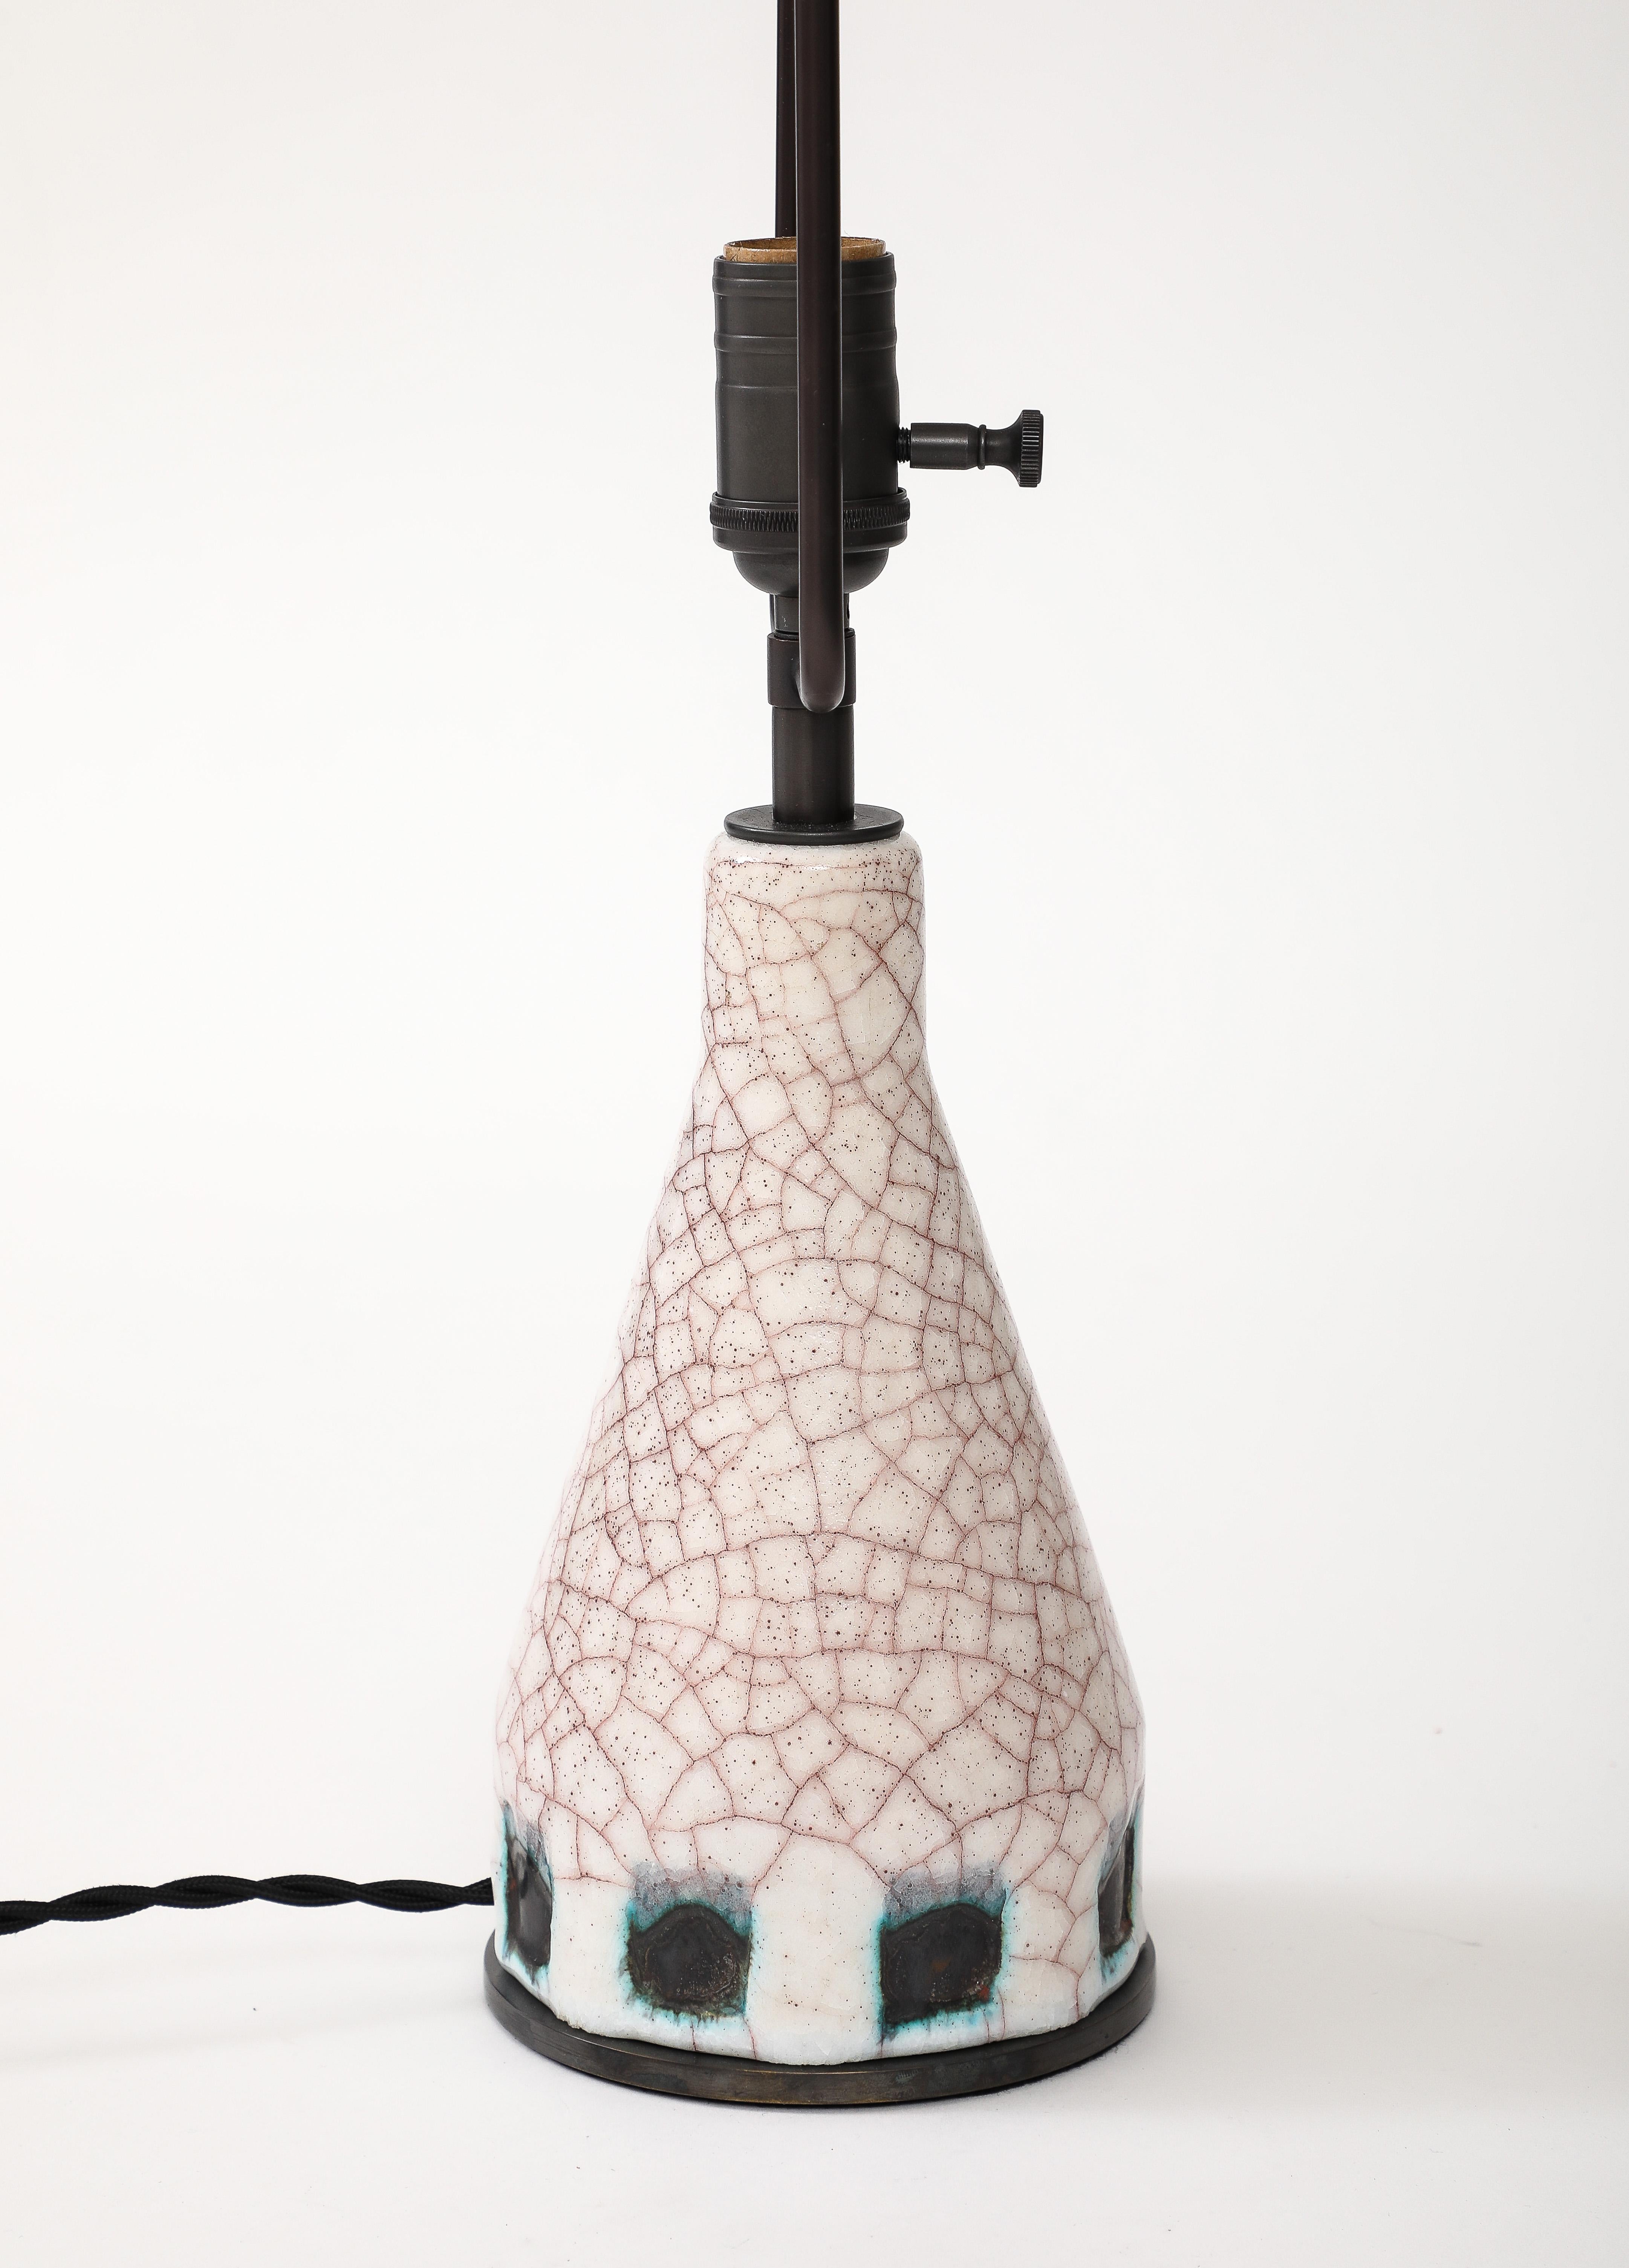 Glazed Ceramic Table Lamp Attributed to Alice Colonieu, France, c. 1960 For Sale 1